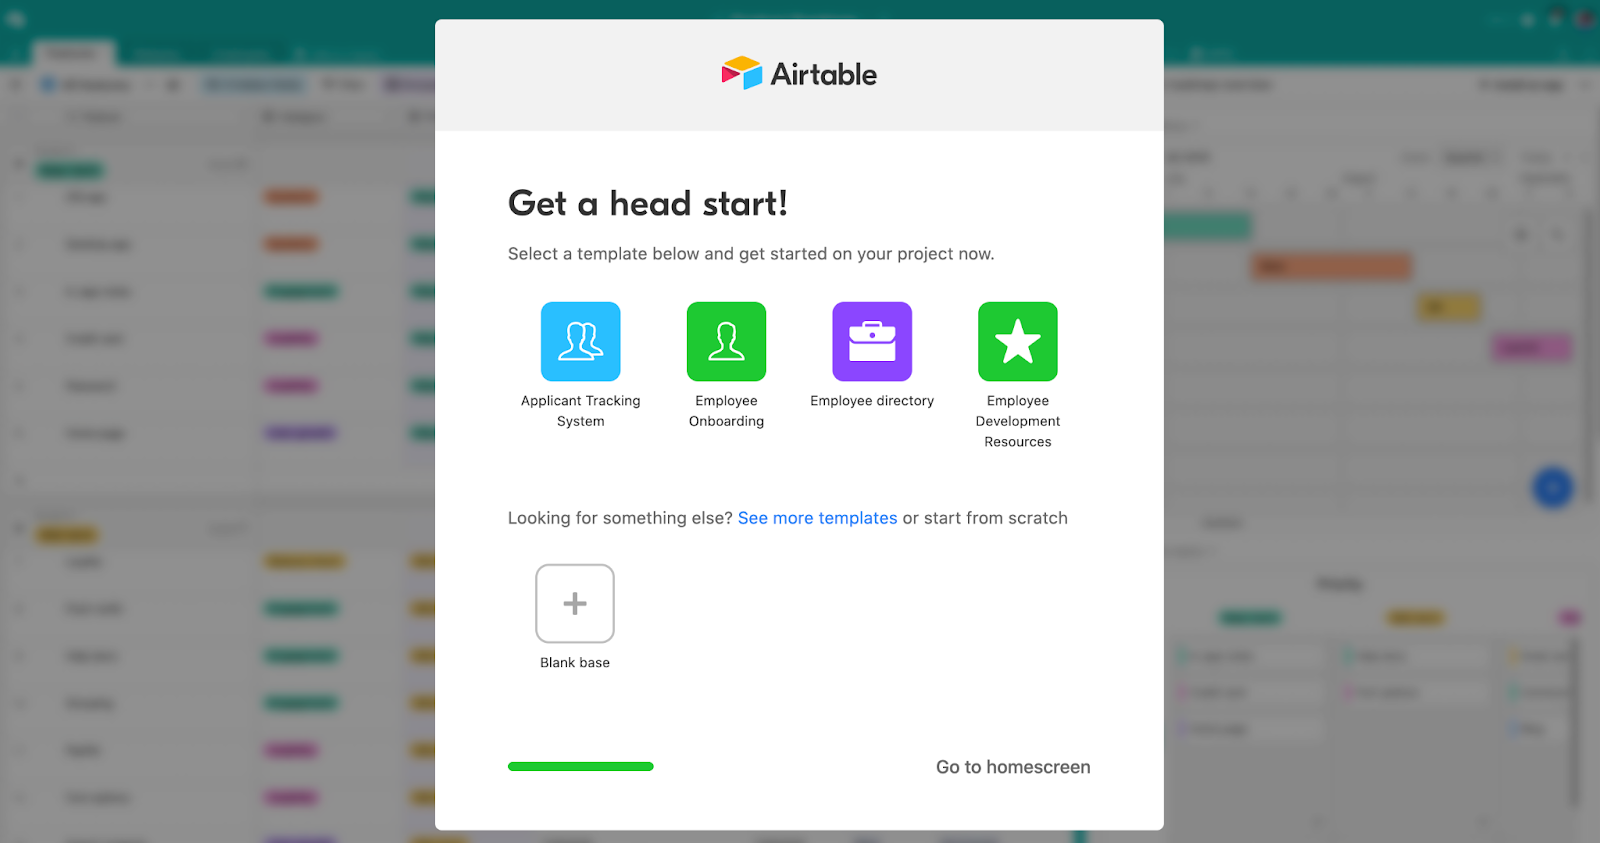 Airtable's get started guide